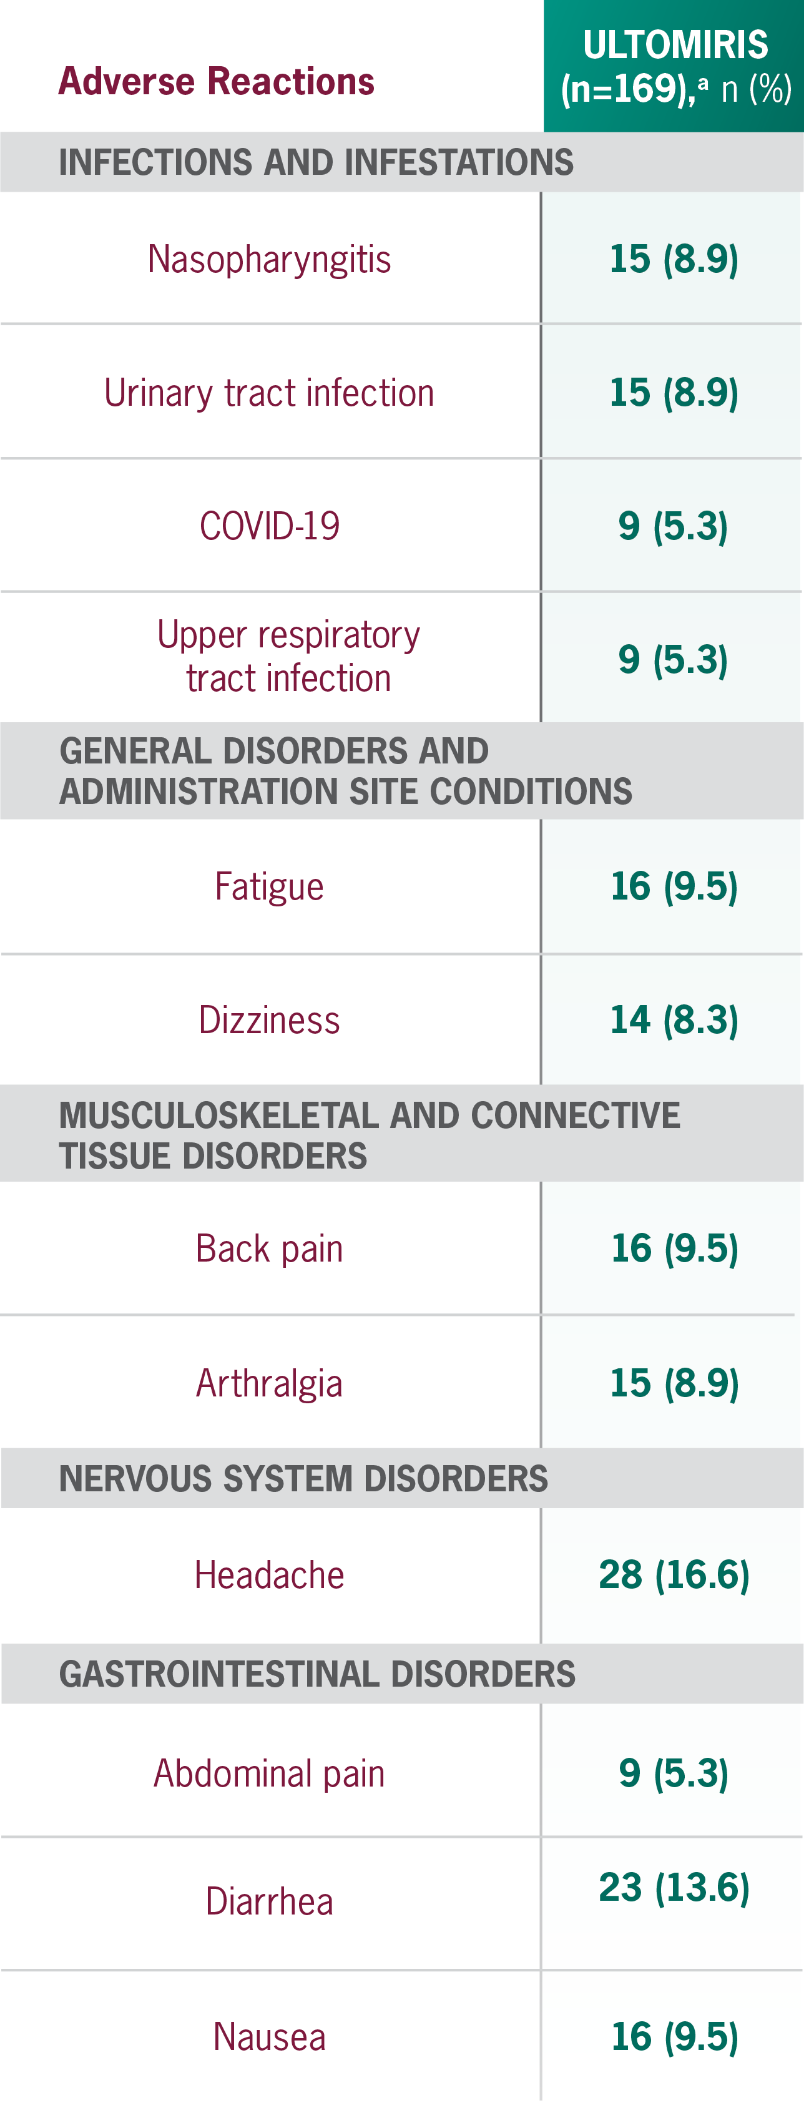 Adverse reactions reported in greater than 5% of patients